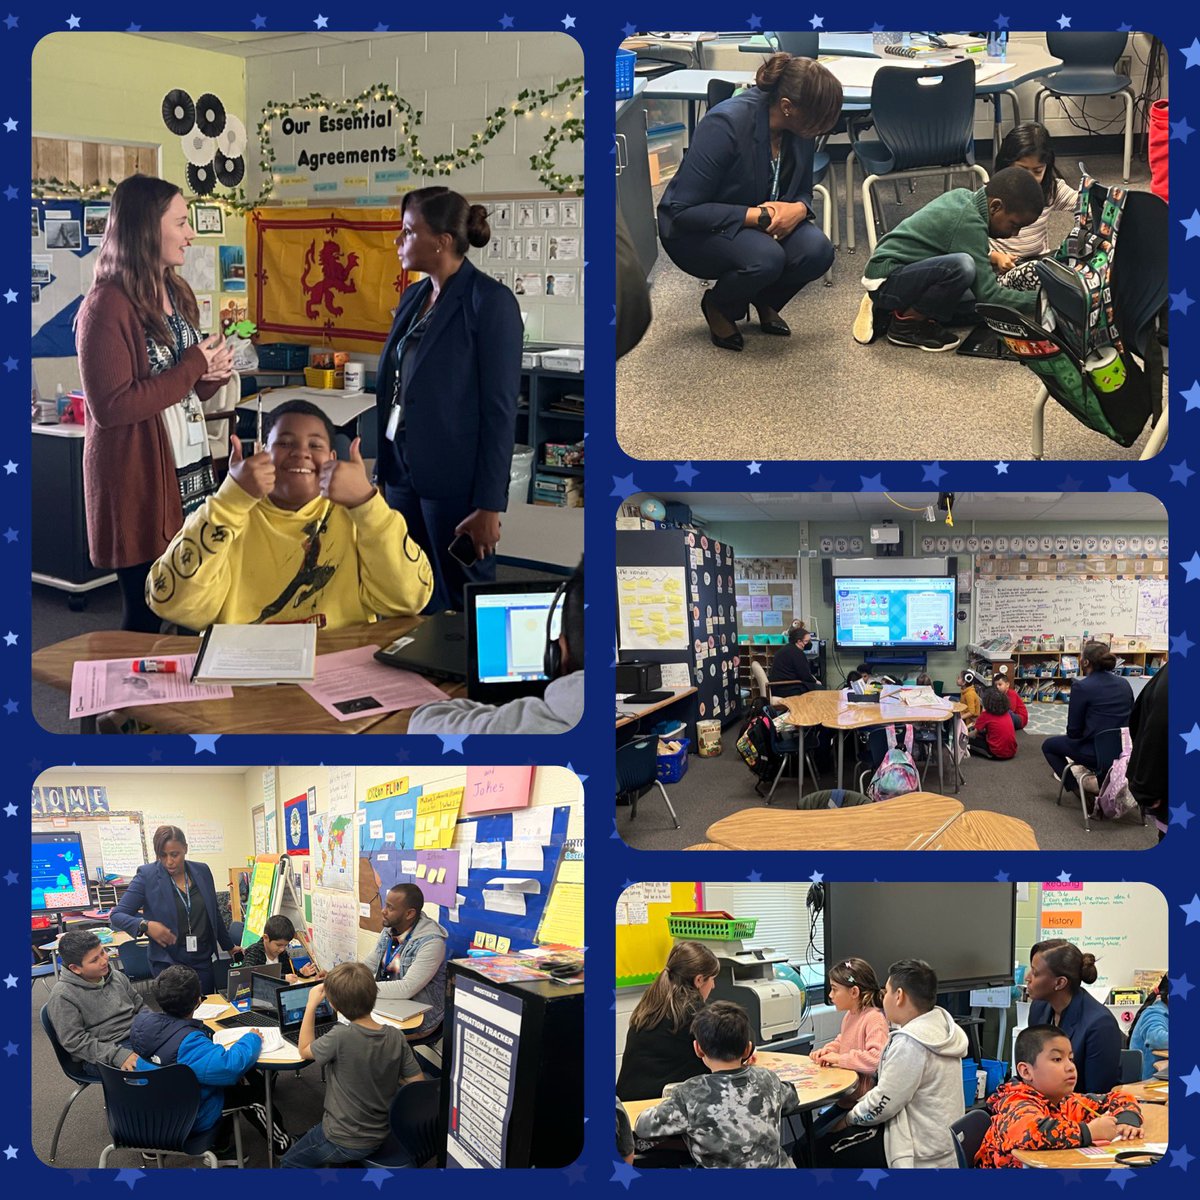 It’s always a pleasure to have our fearless leader @LDMcDade visit Mullen. Our scholars were excited to share their learning with you. We look forward to your next visit! @PWCSNews @MullenShamrocks @PypMullen @JenHoffowerPWCS @rgast9223